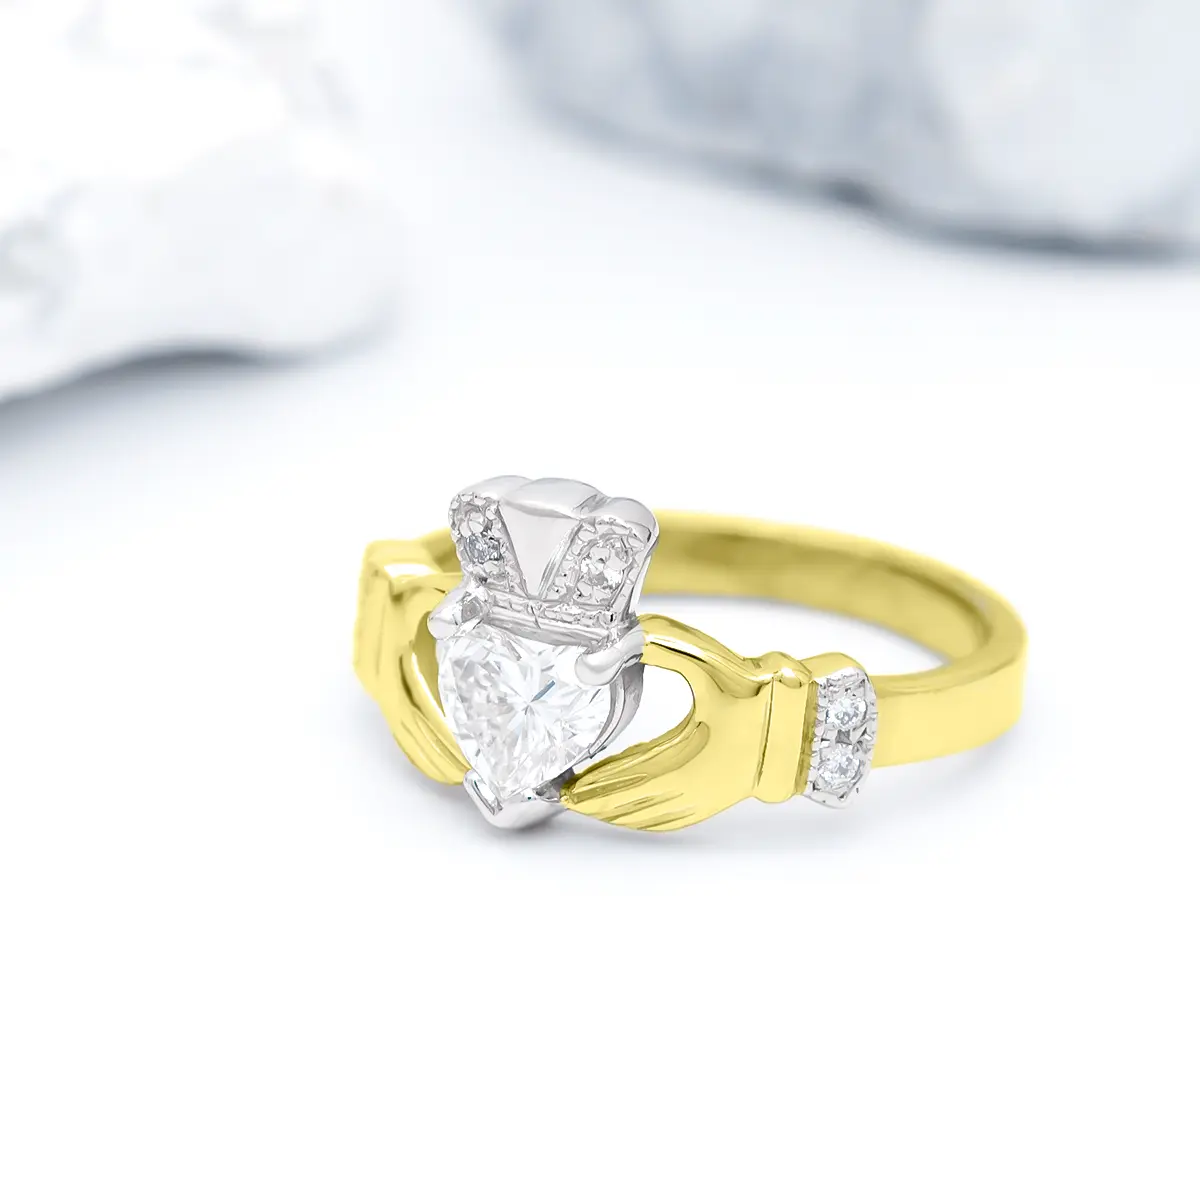 Gold Claddagh Engagement Ring with Heartshape Diamond...